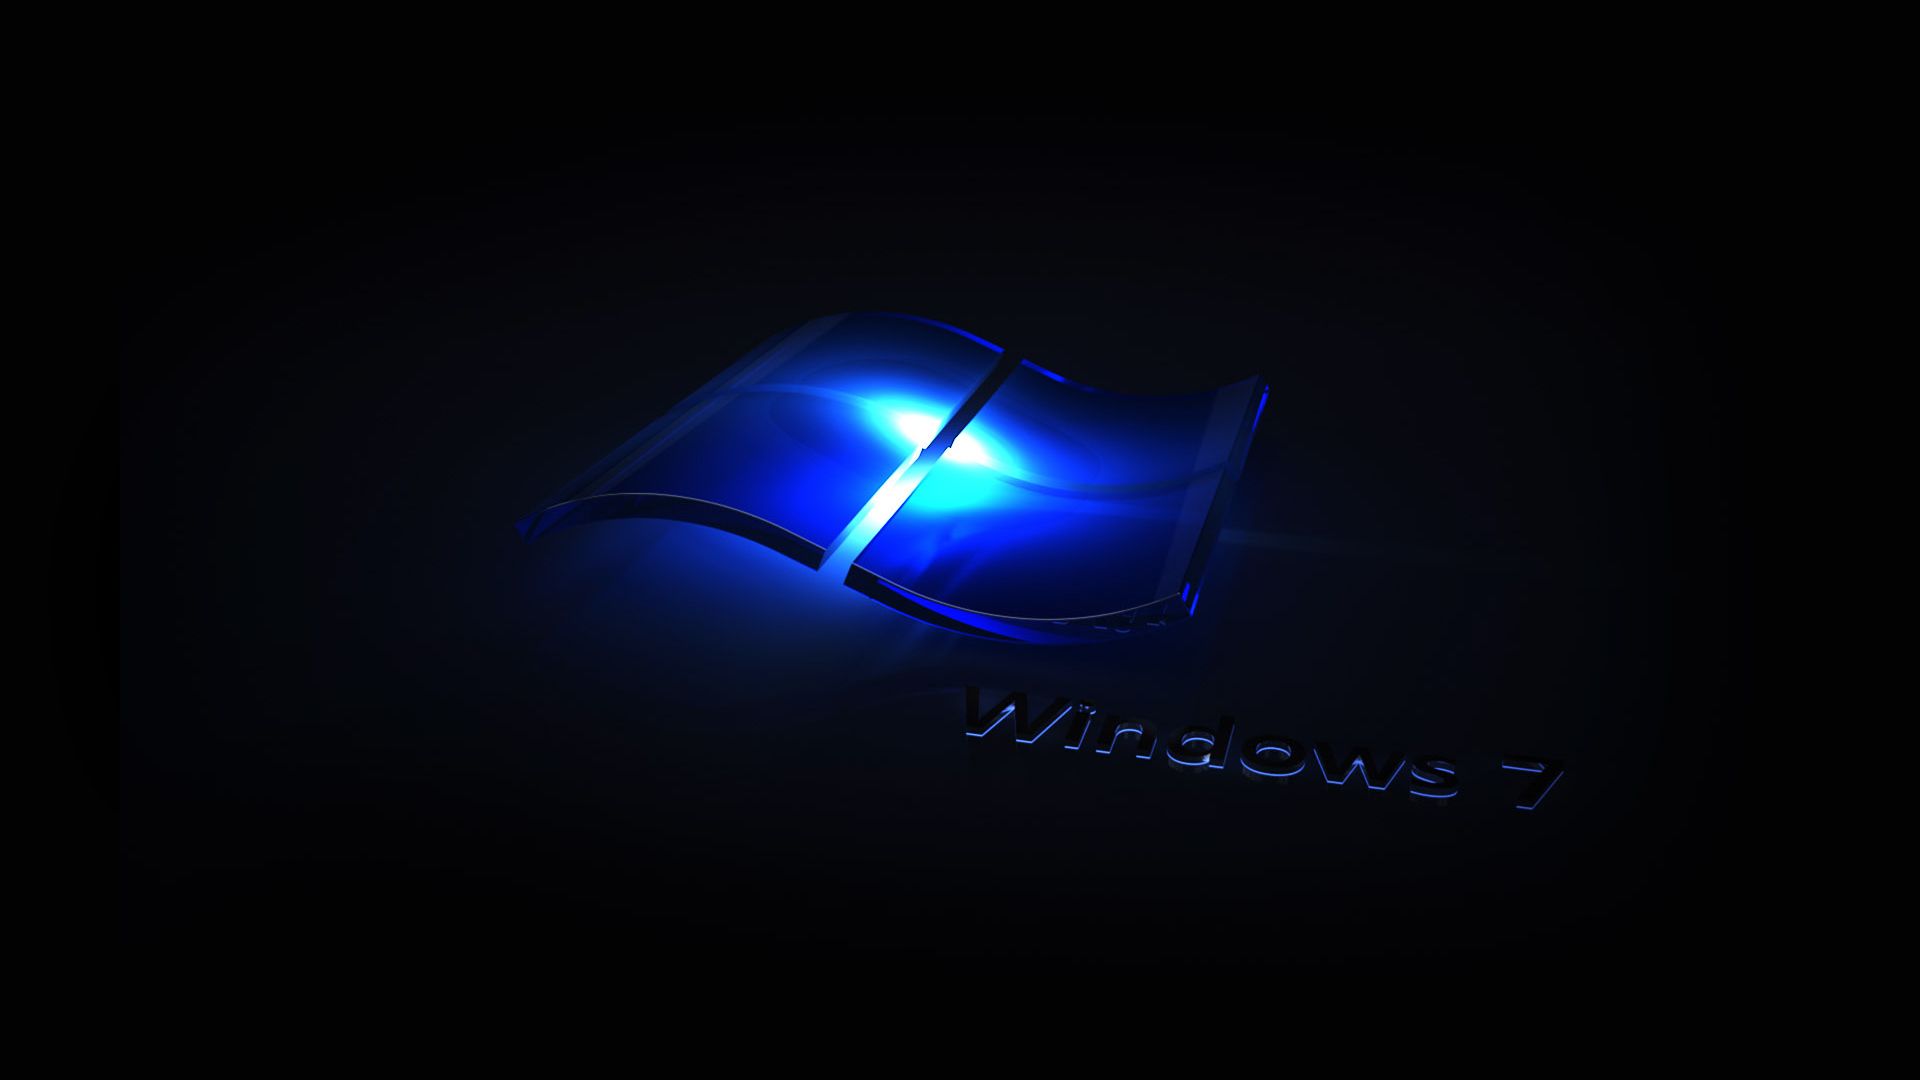 High Definition Windows 7 Wallpaper Background For Free Download